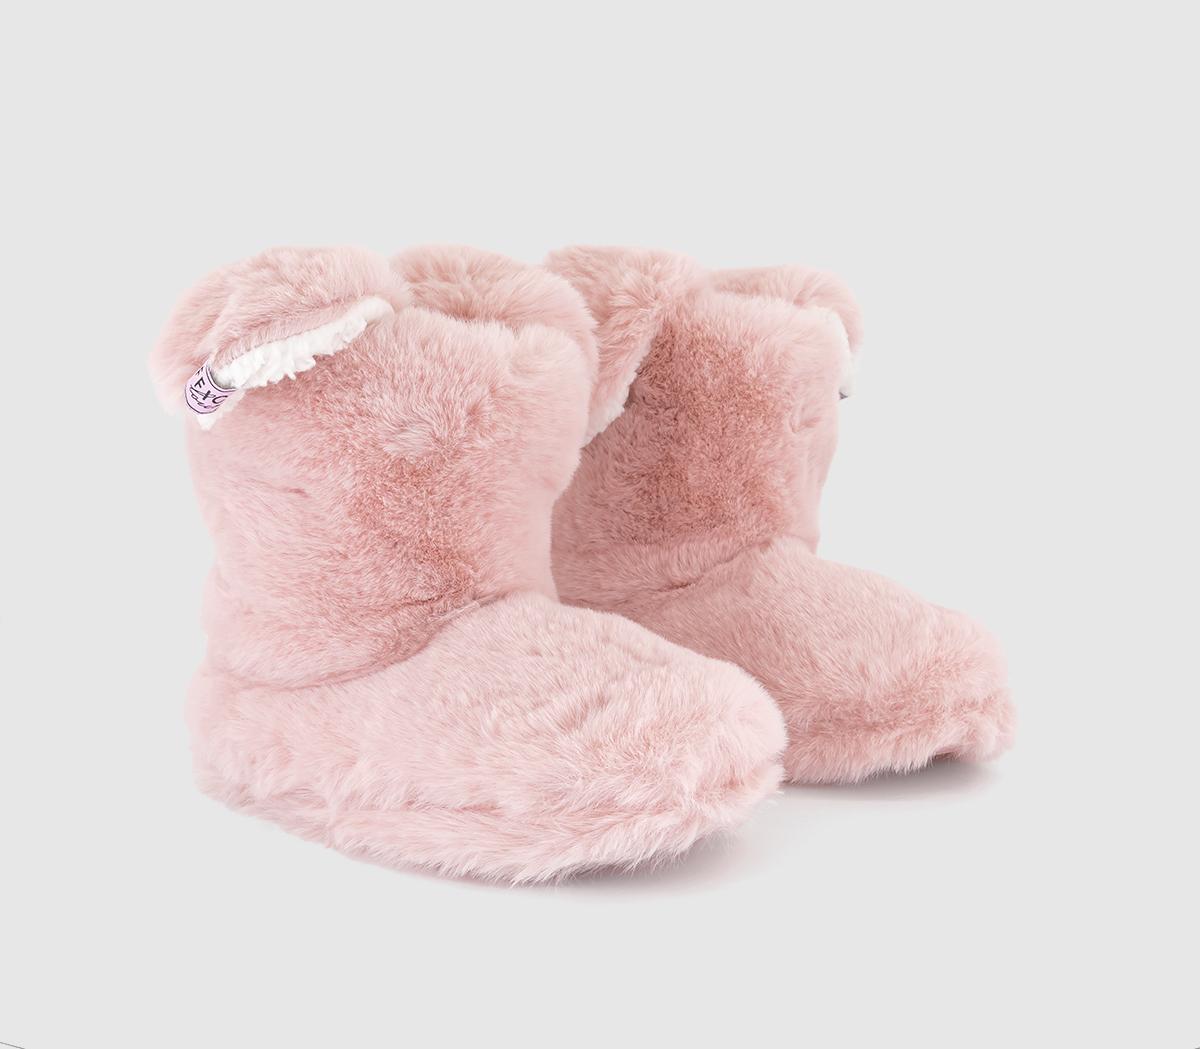 OFFICE Lounge Womens Ruby Bunny Slipper Boots New Pink, 7-8